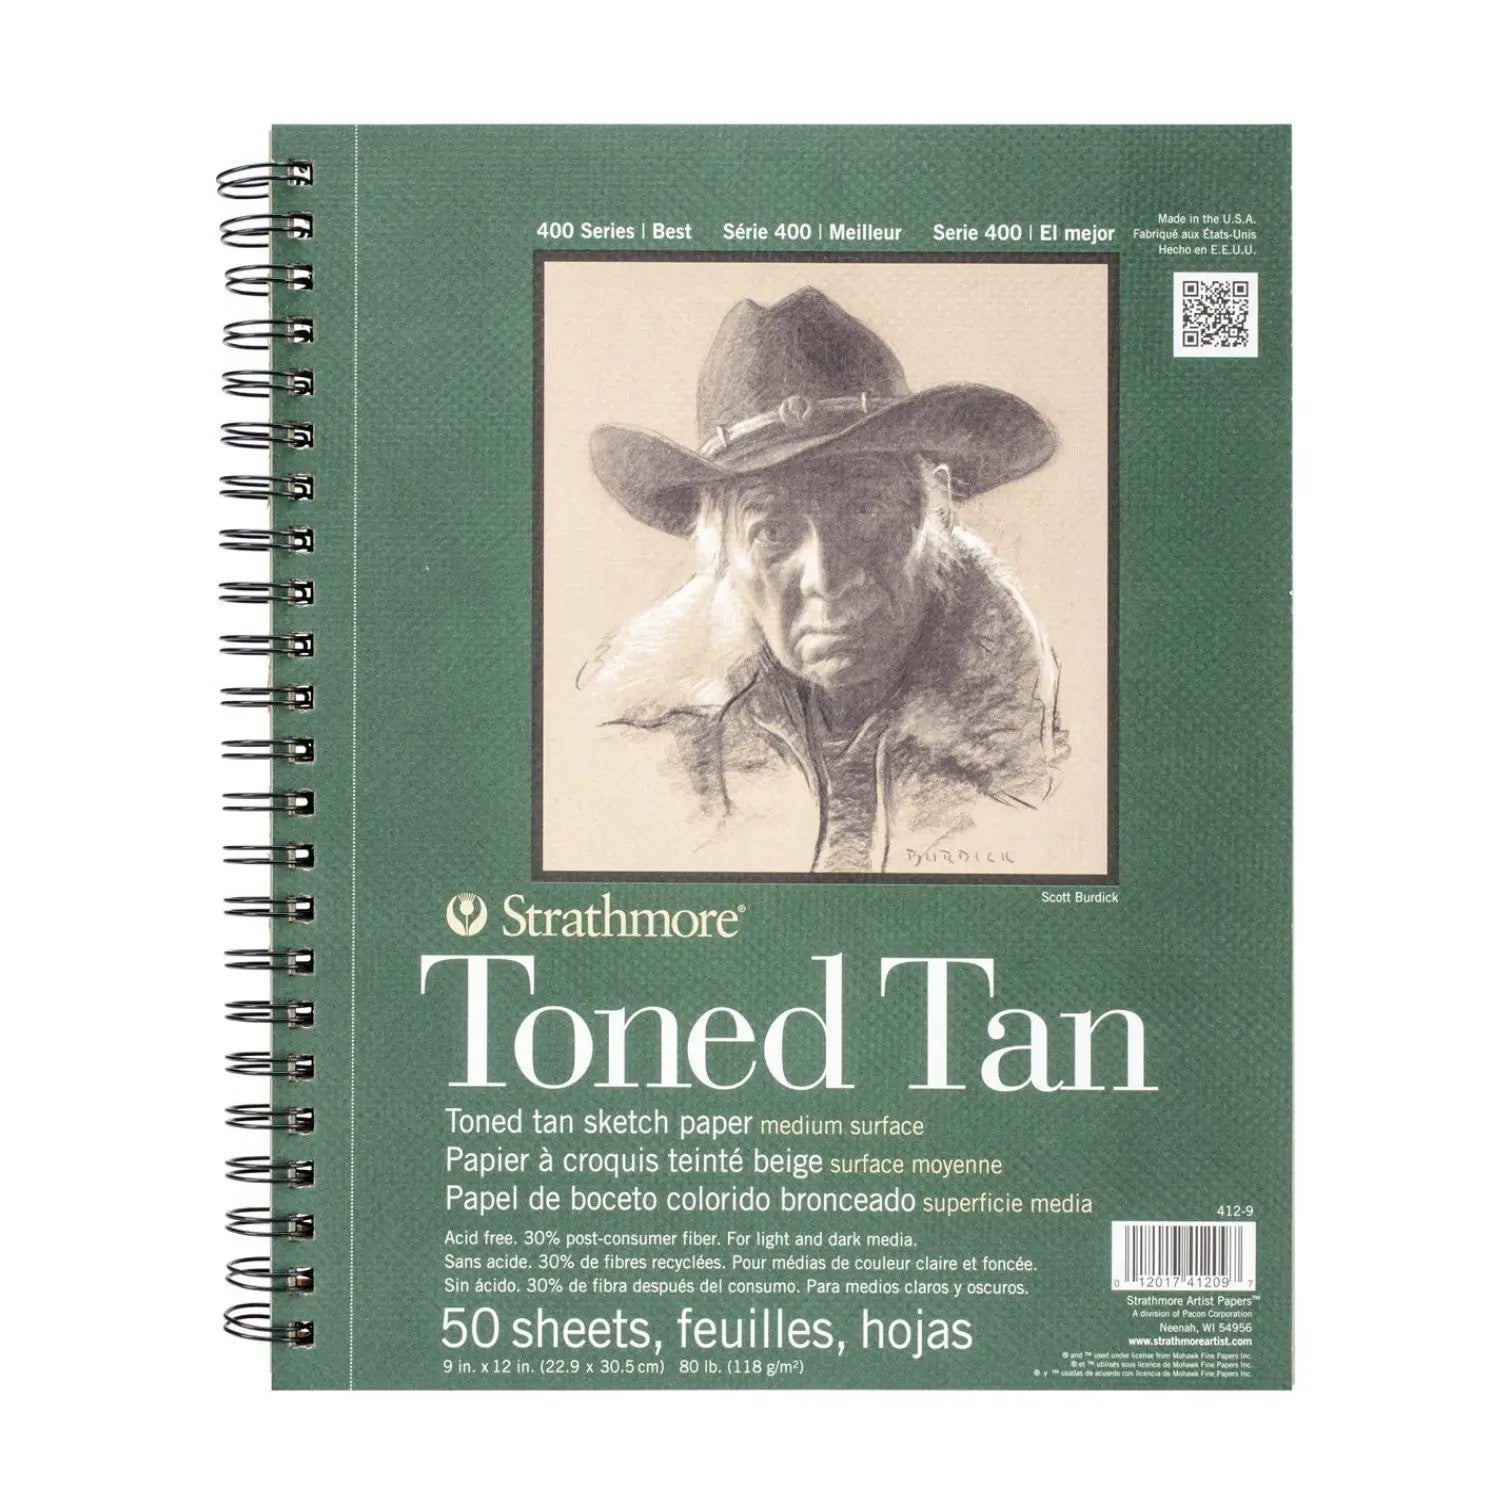 Strathmore Spiral Toned Tan Sketchpad 400 Series Strathmore